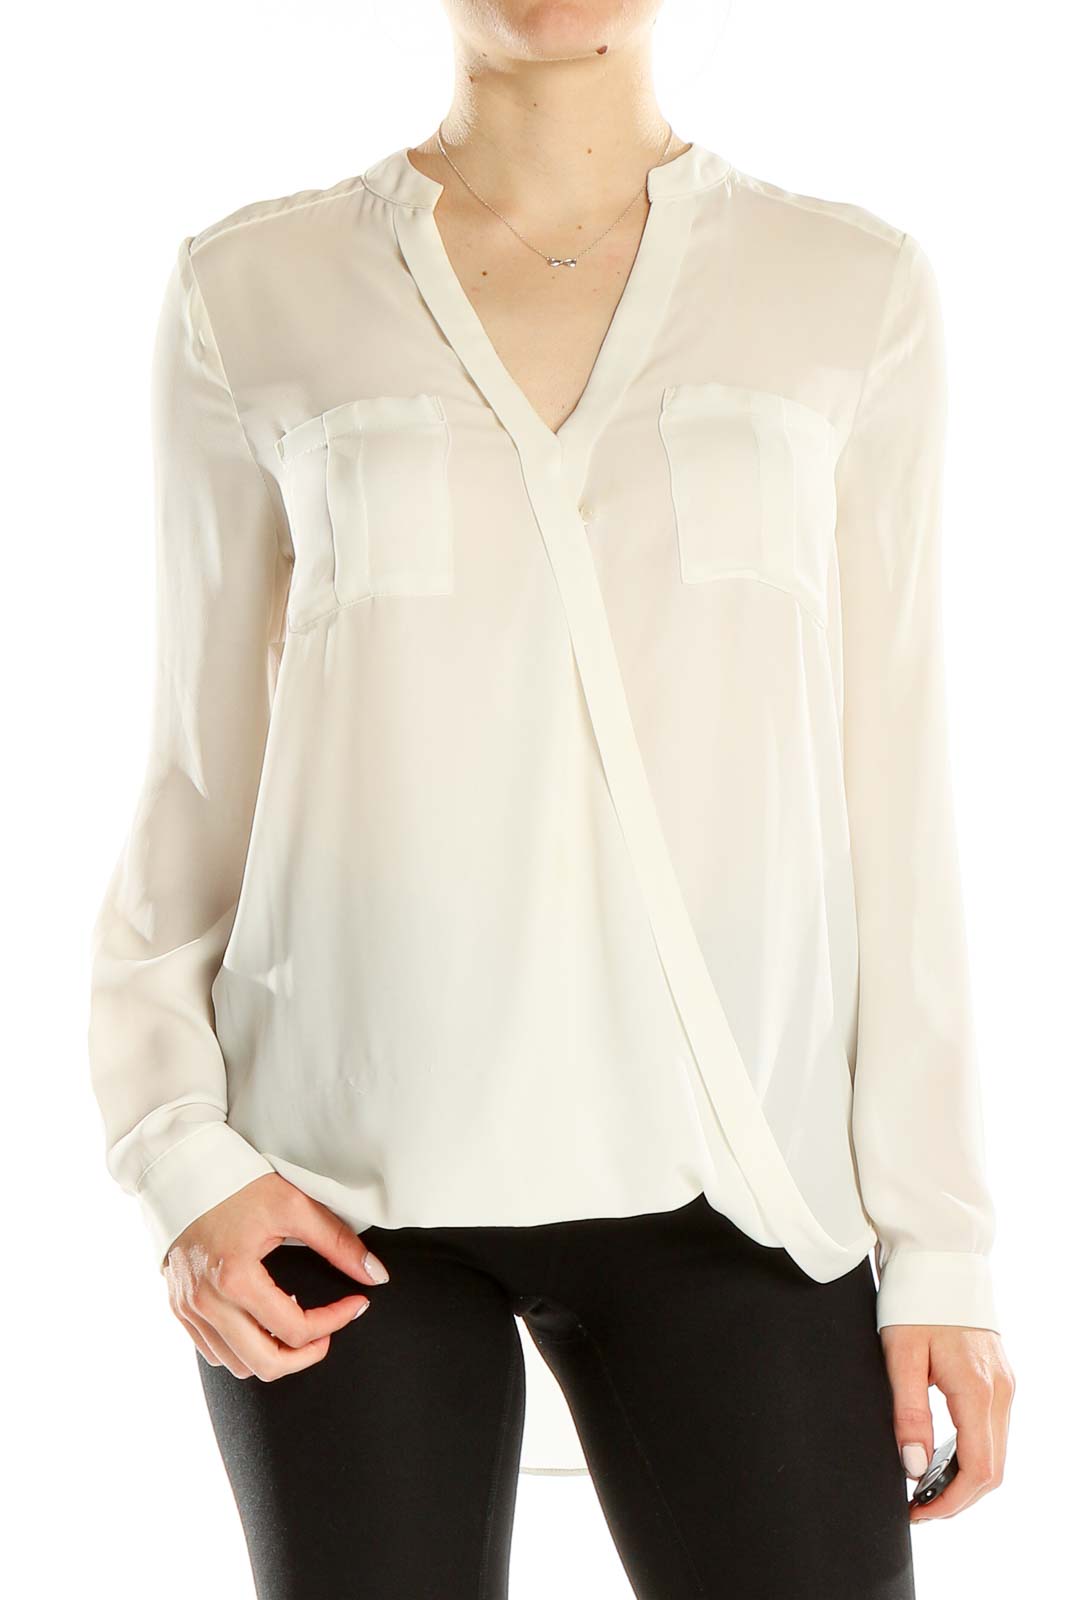 White Blouse Front